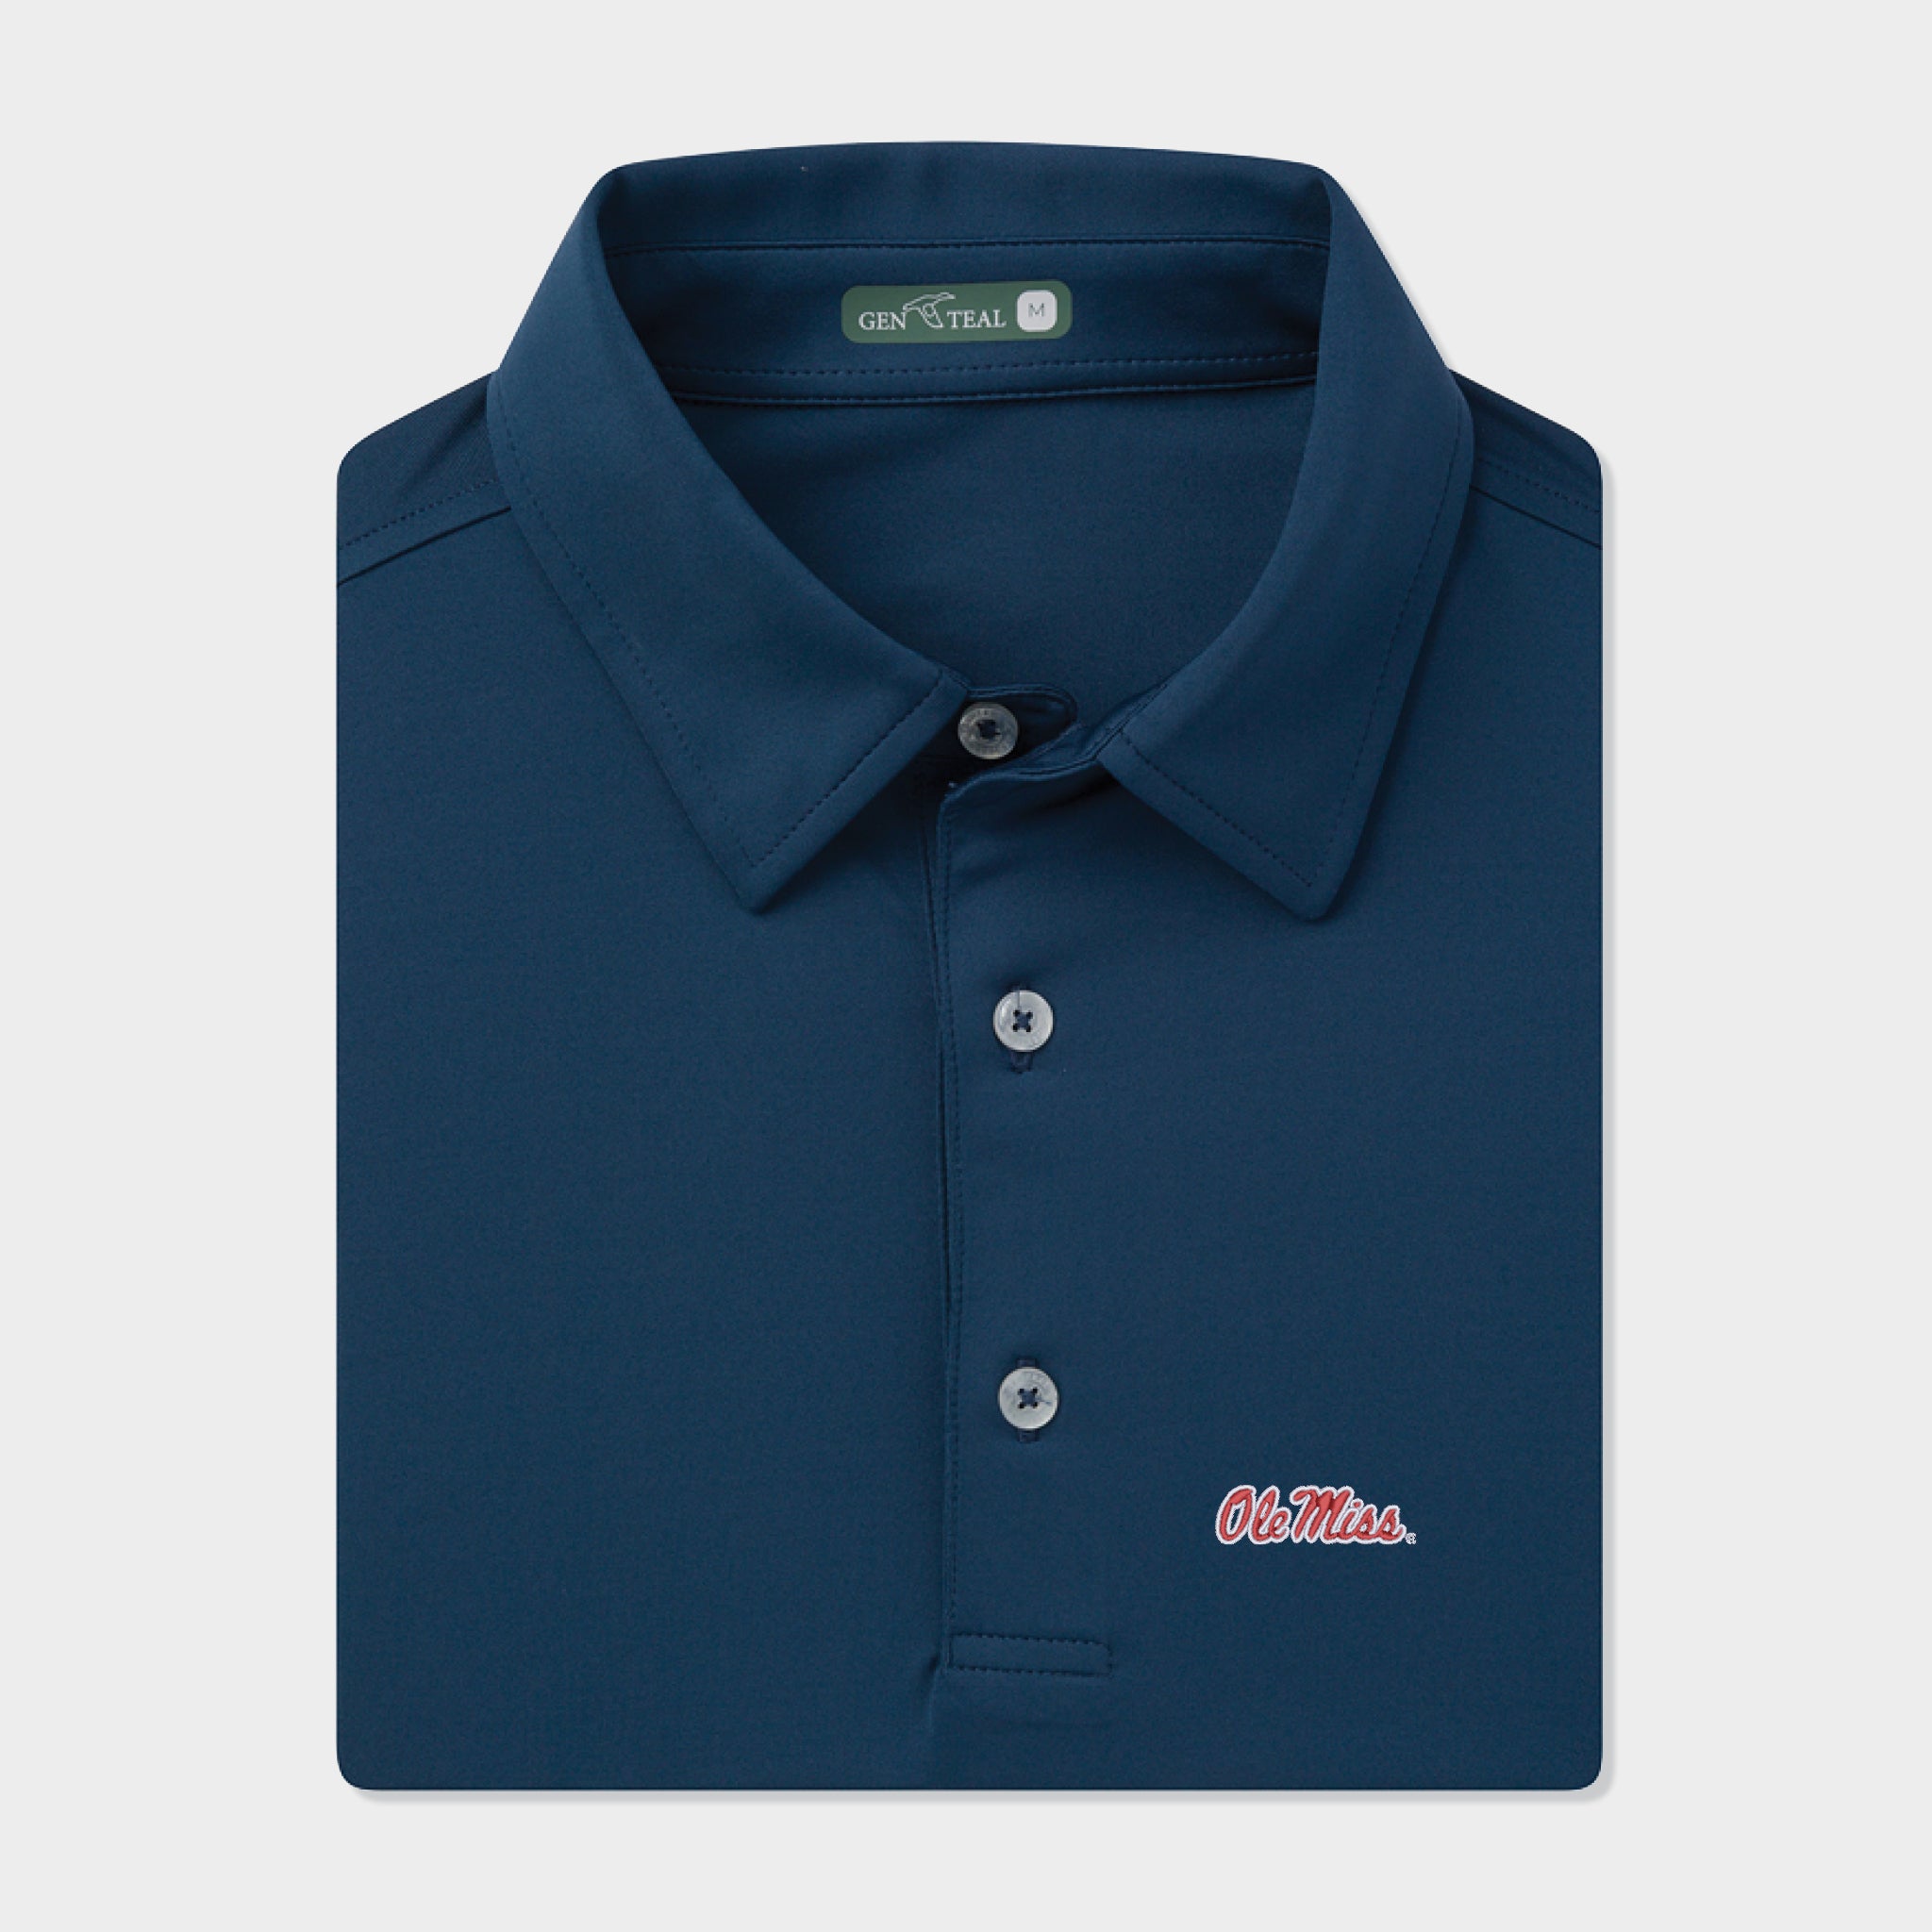 OIe Miss Solid Performance Polo